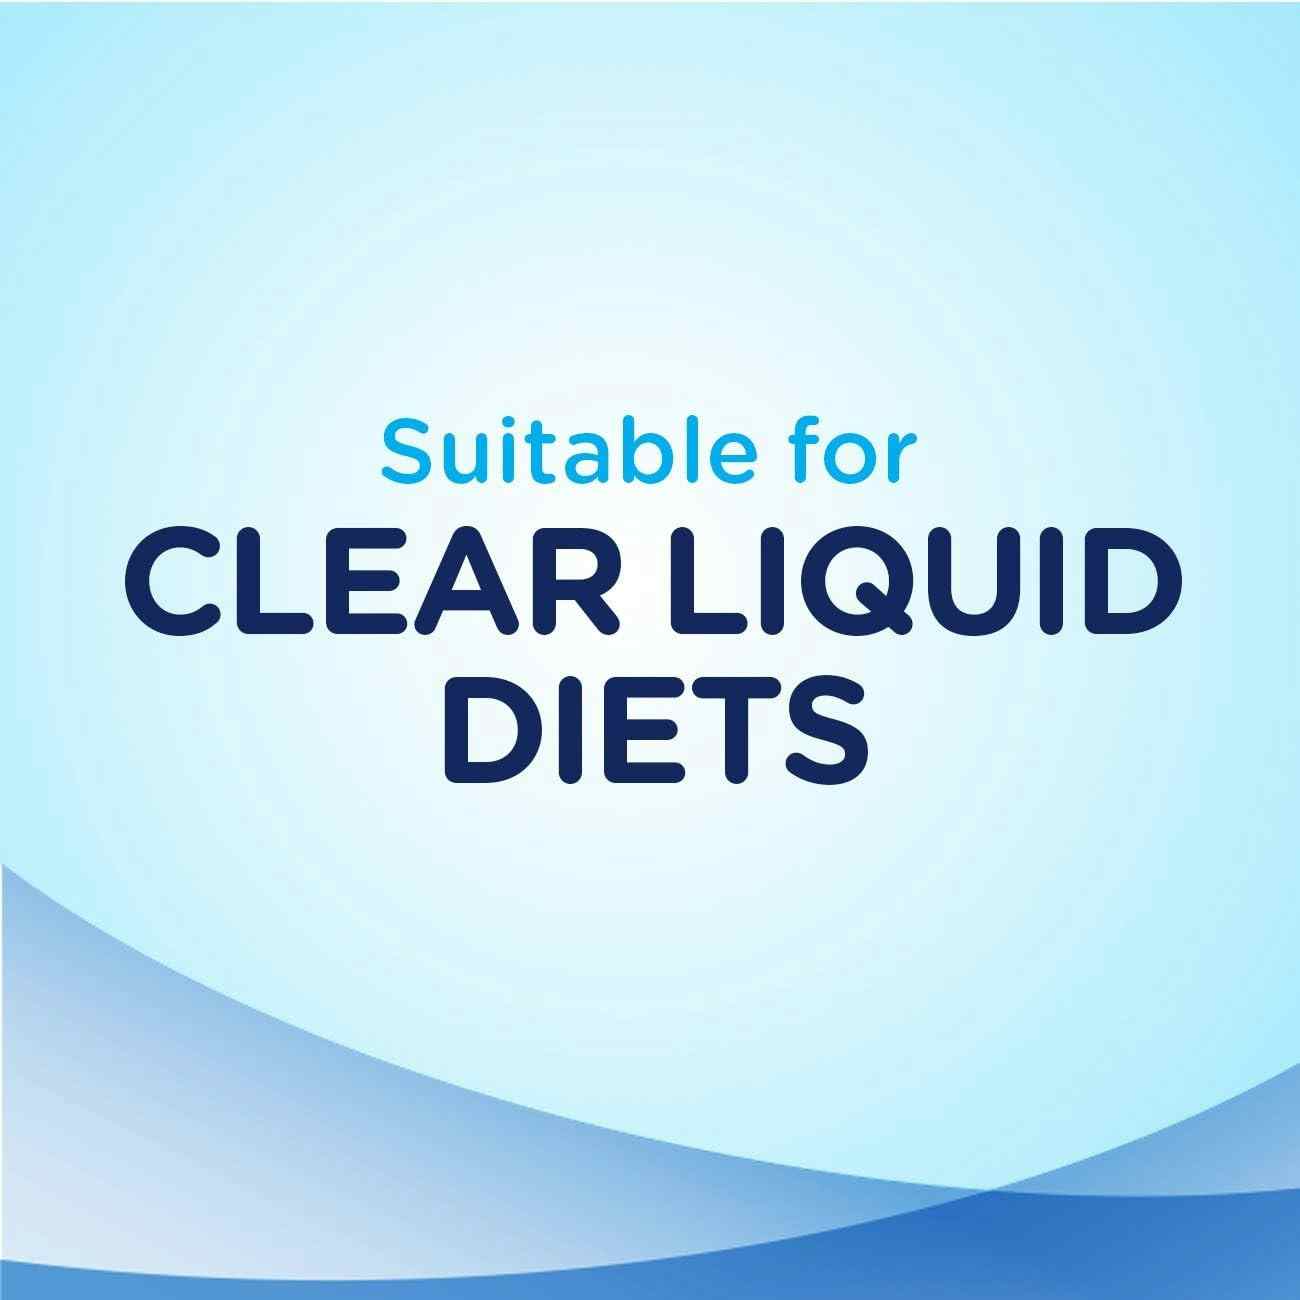 Ensure Clear Nutritional Drink